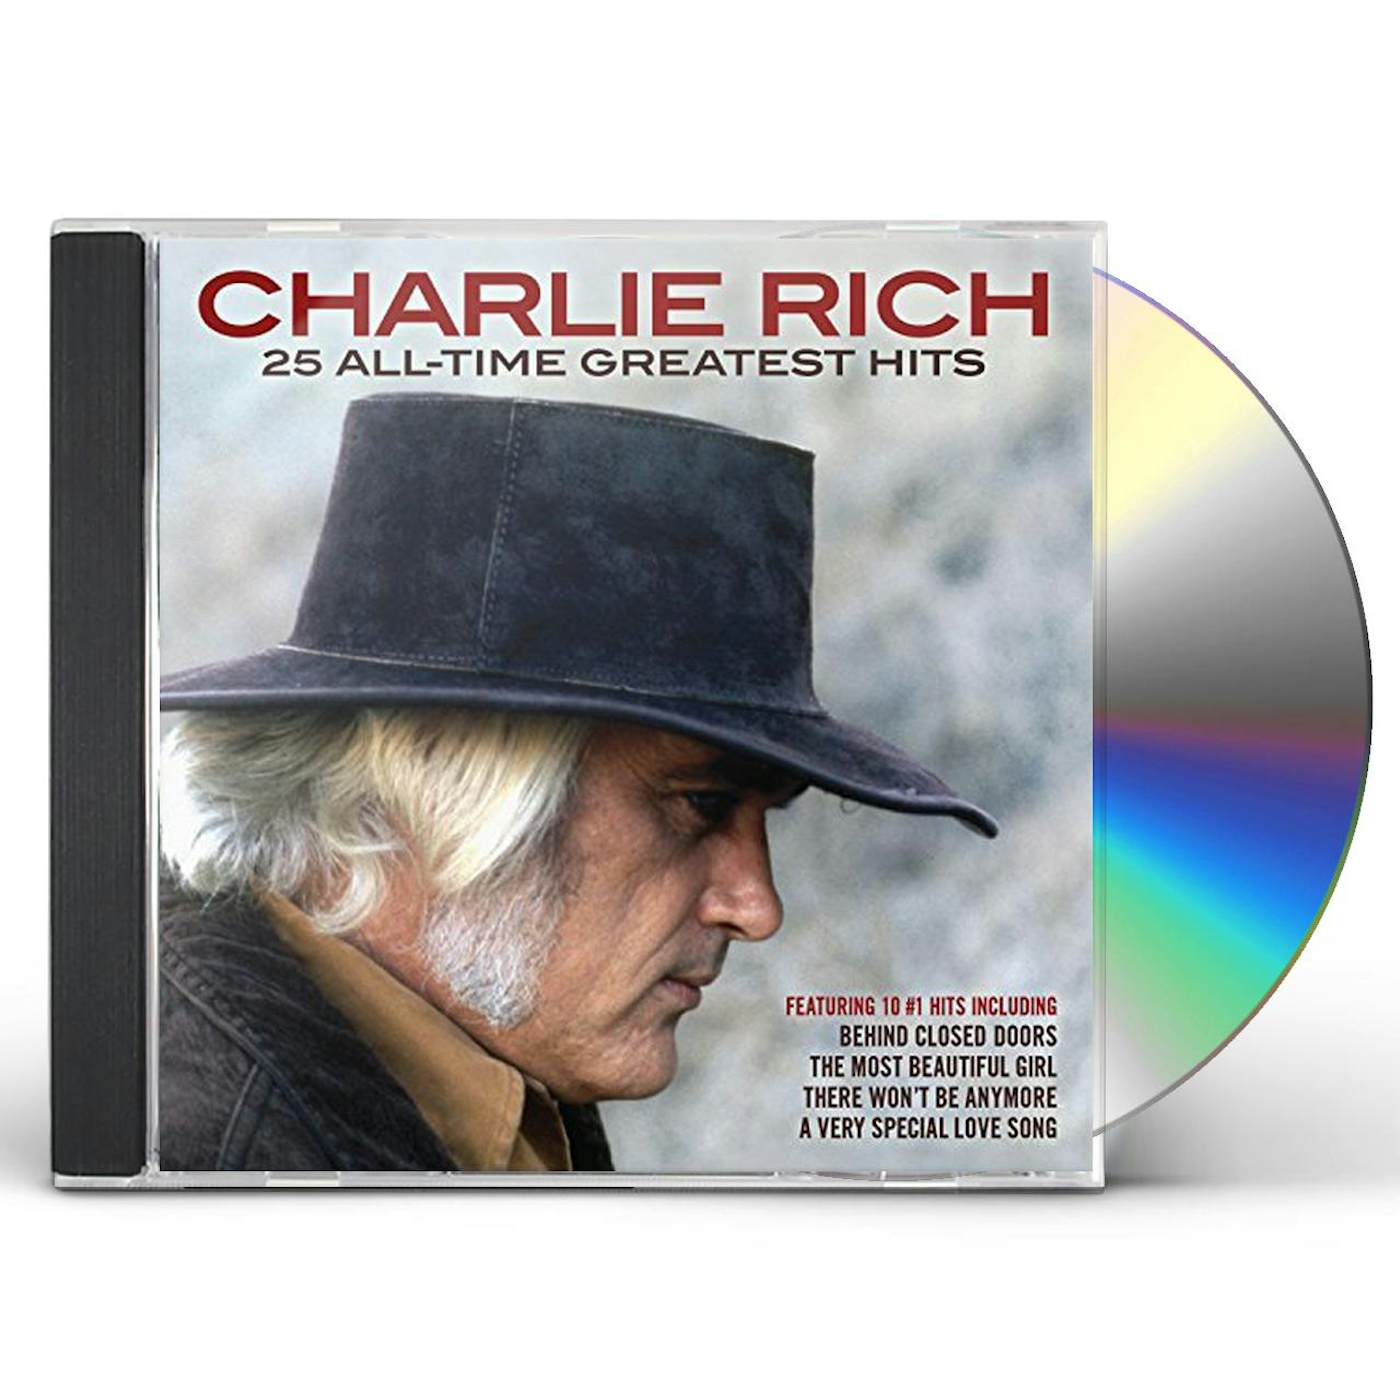 Charlie Rich 25 ALL-TIME GREATEST HITS CD